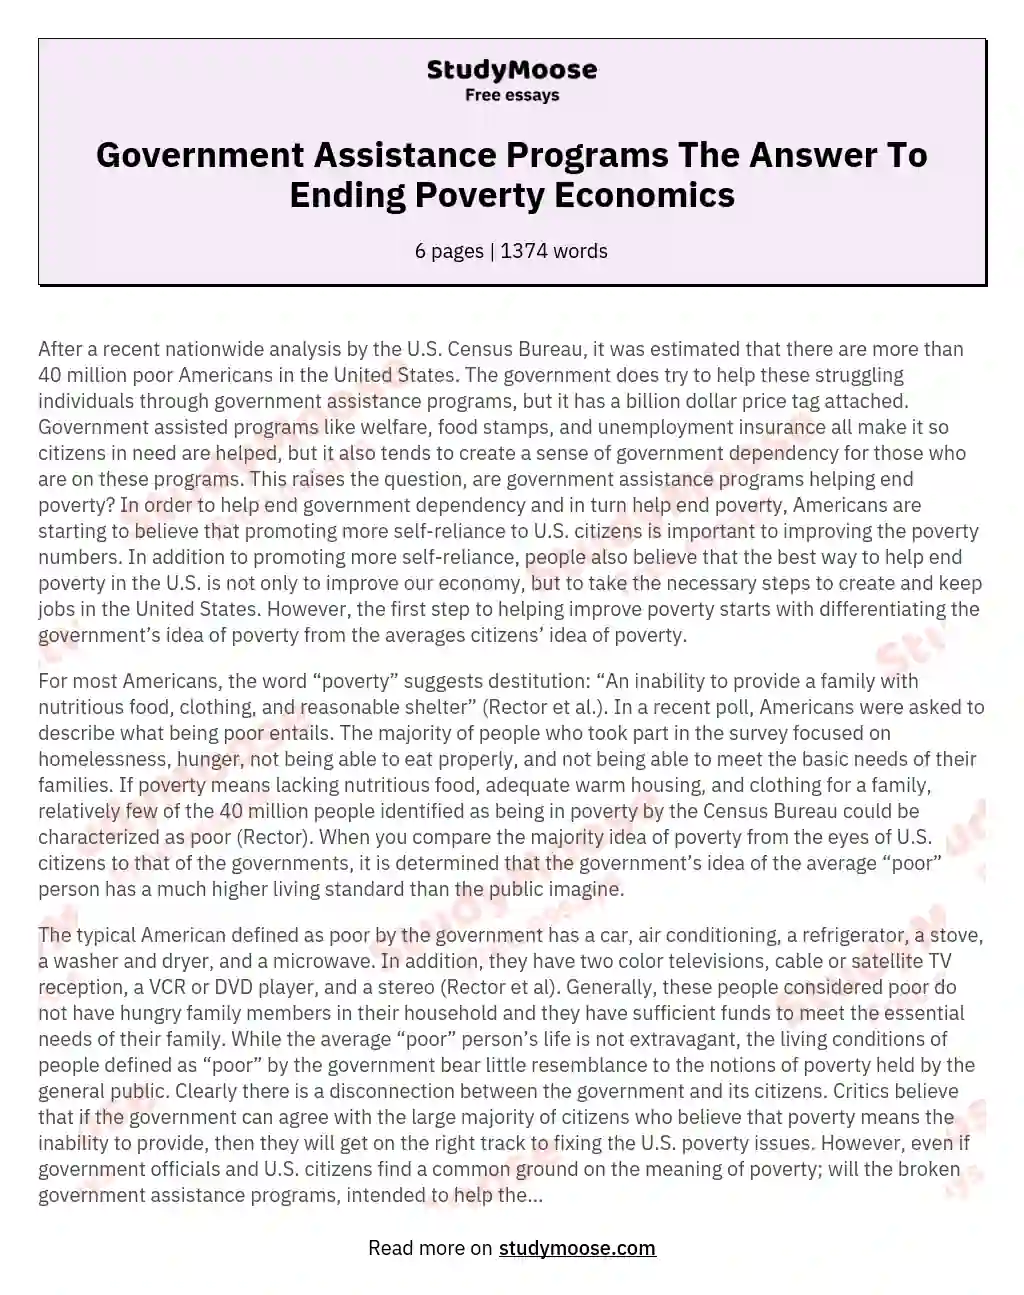 Government Assistance Programs The Answer To Ending Poverty Economics essay